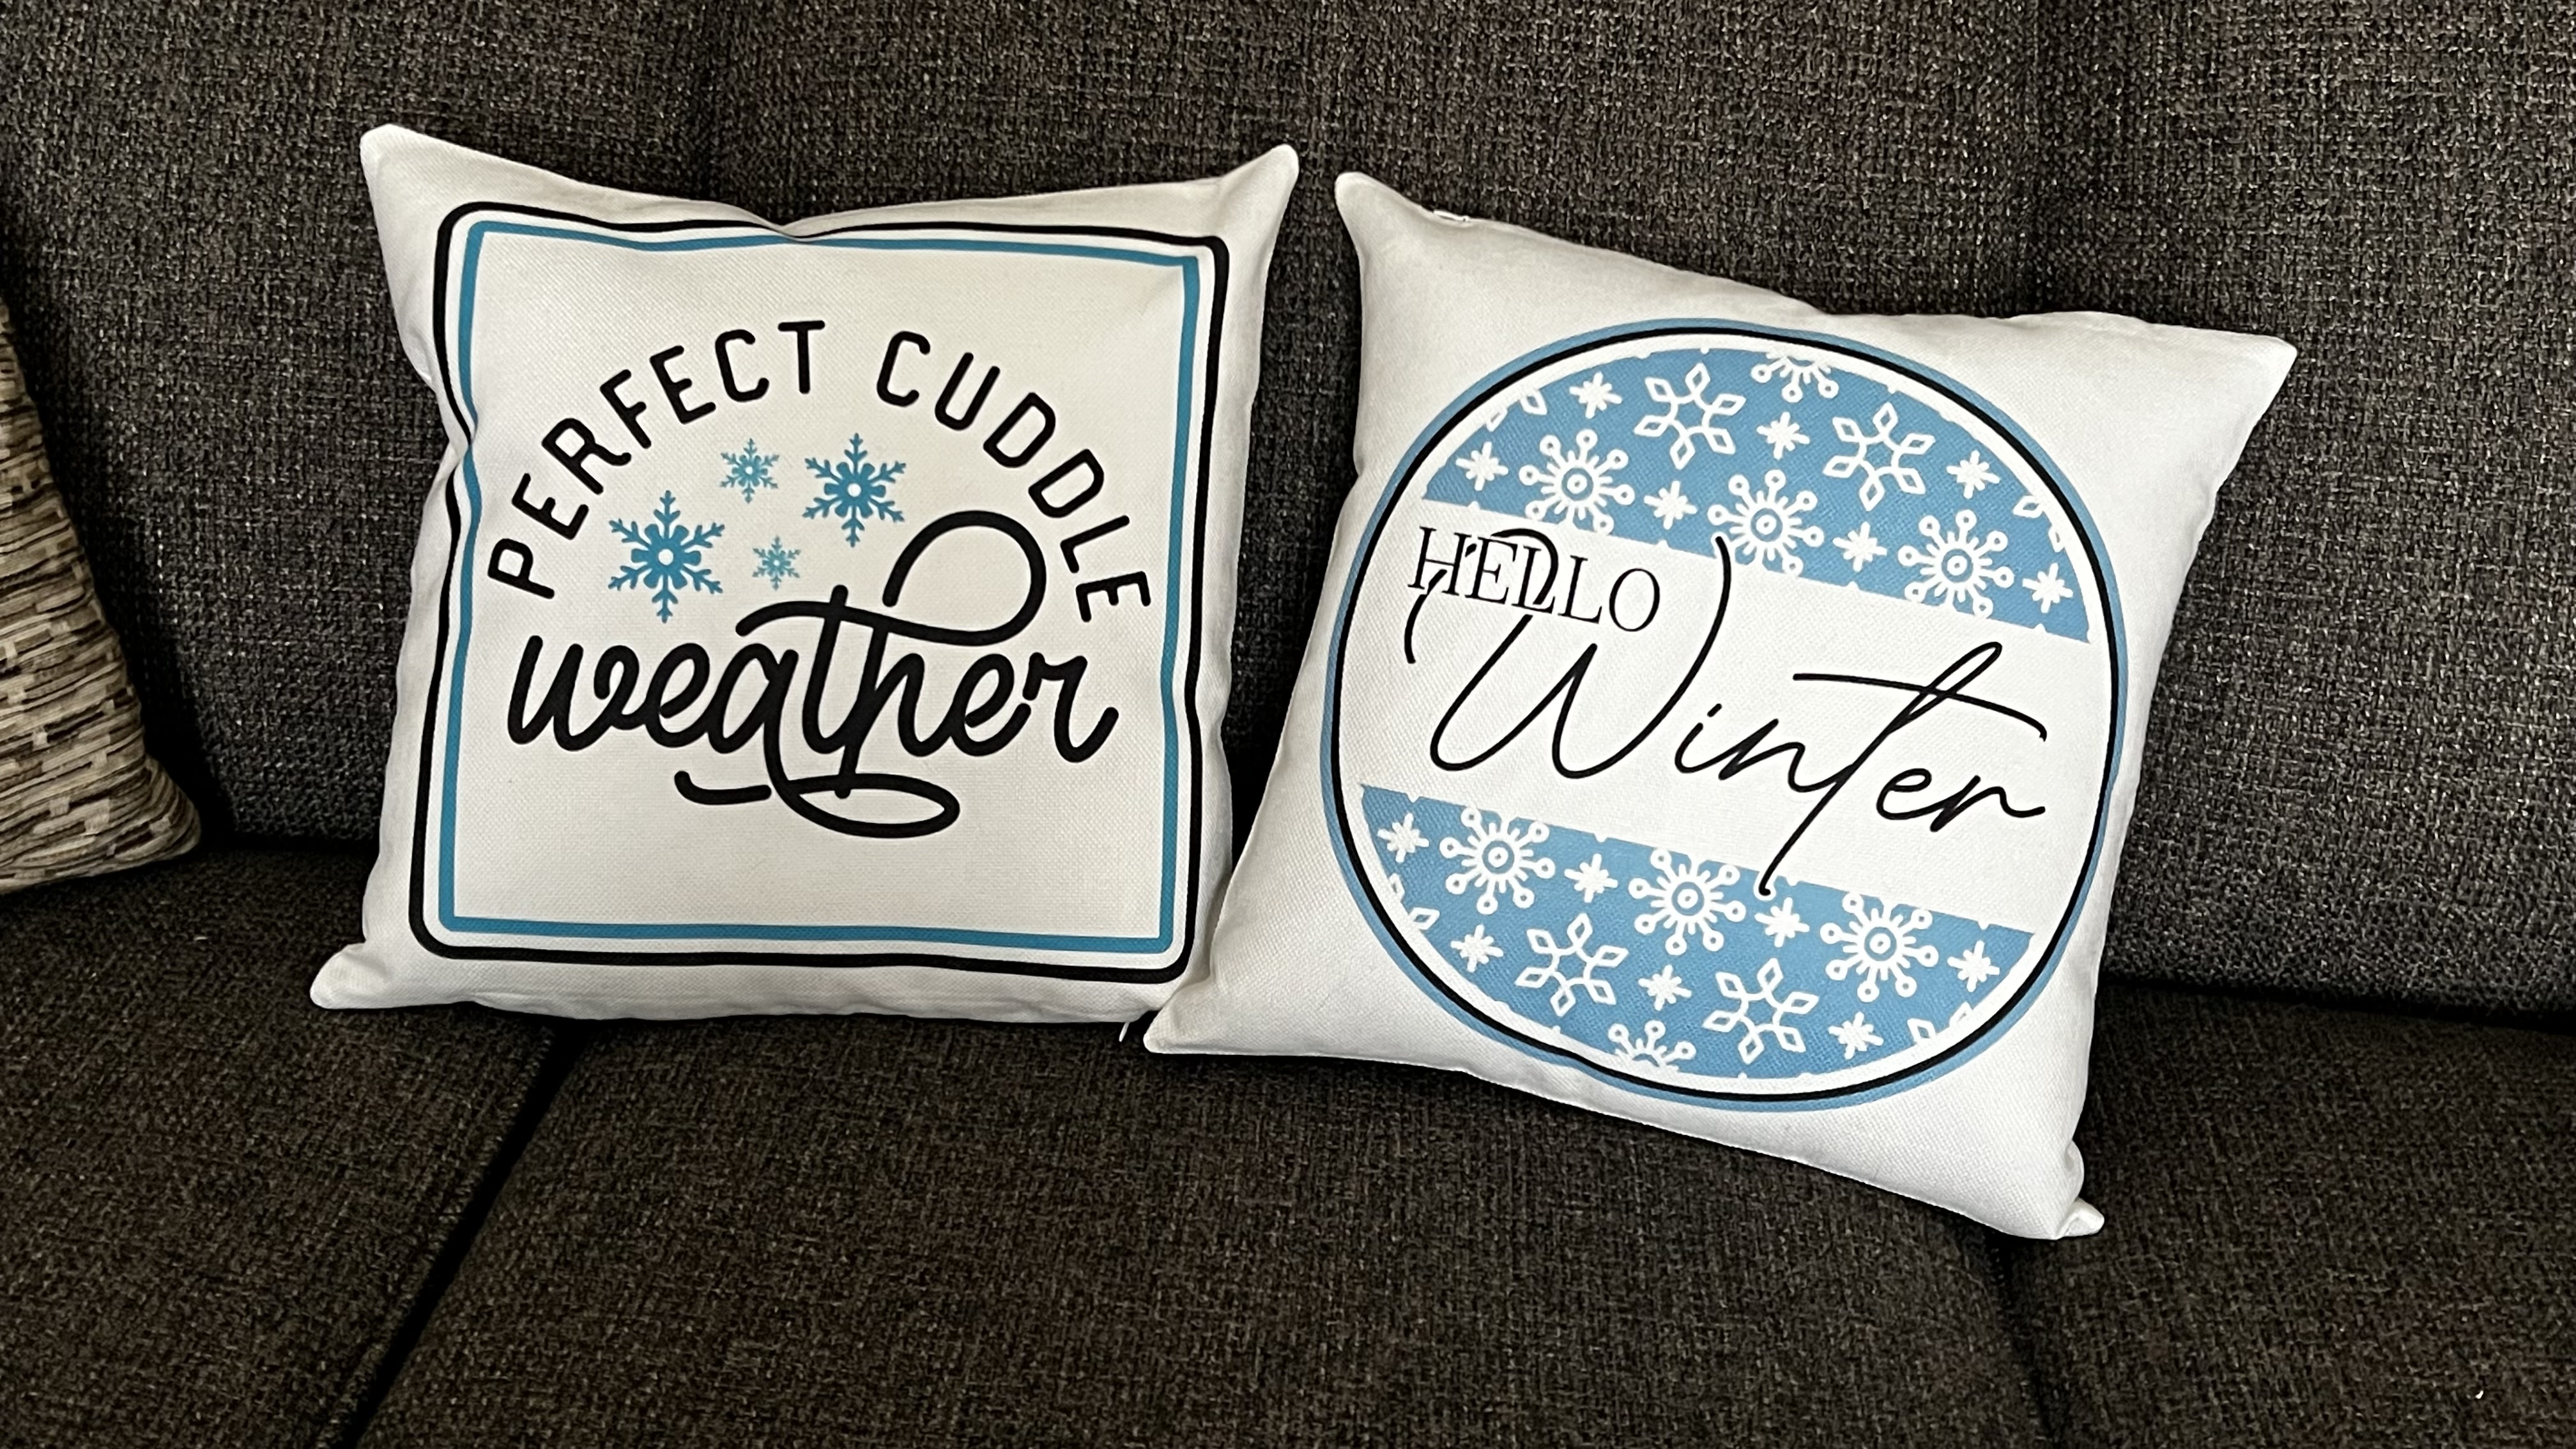 Pillows  made with sublimation printing